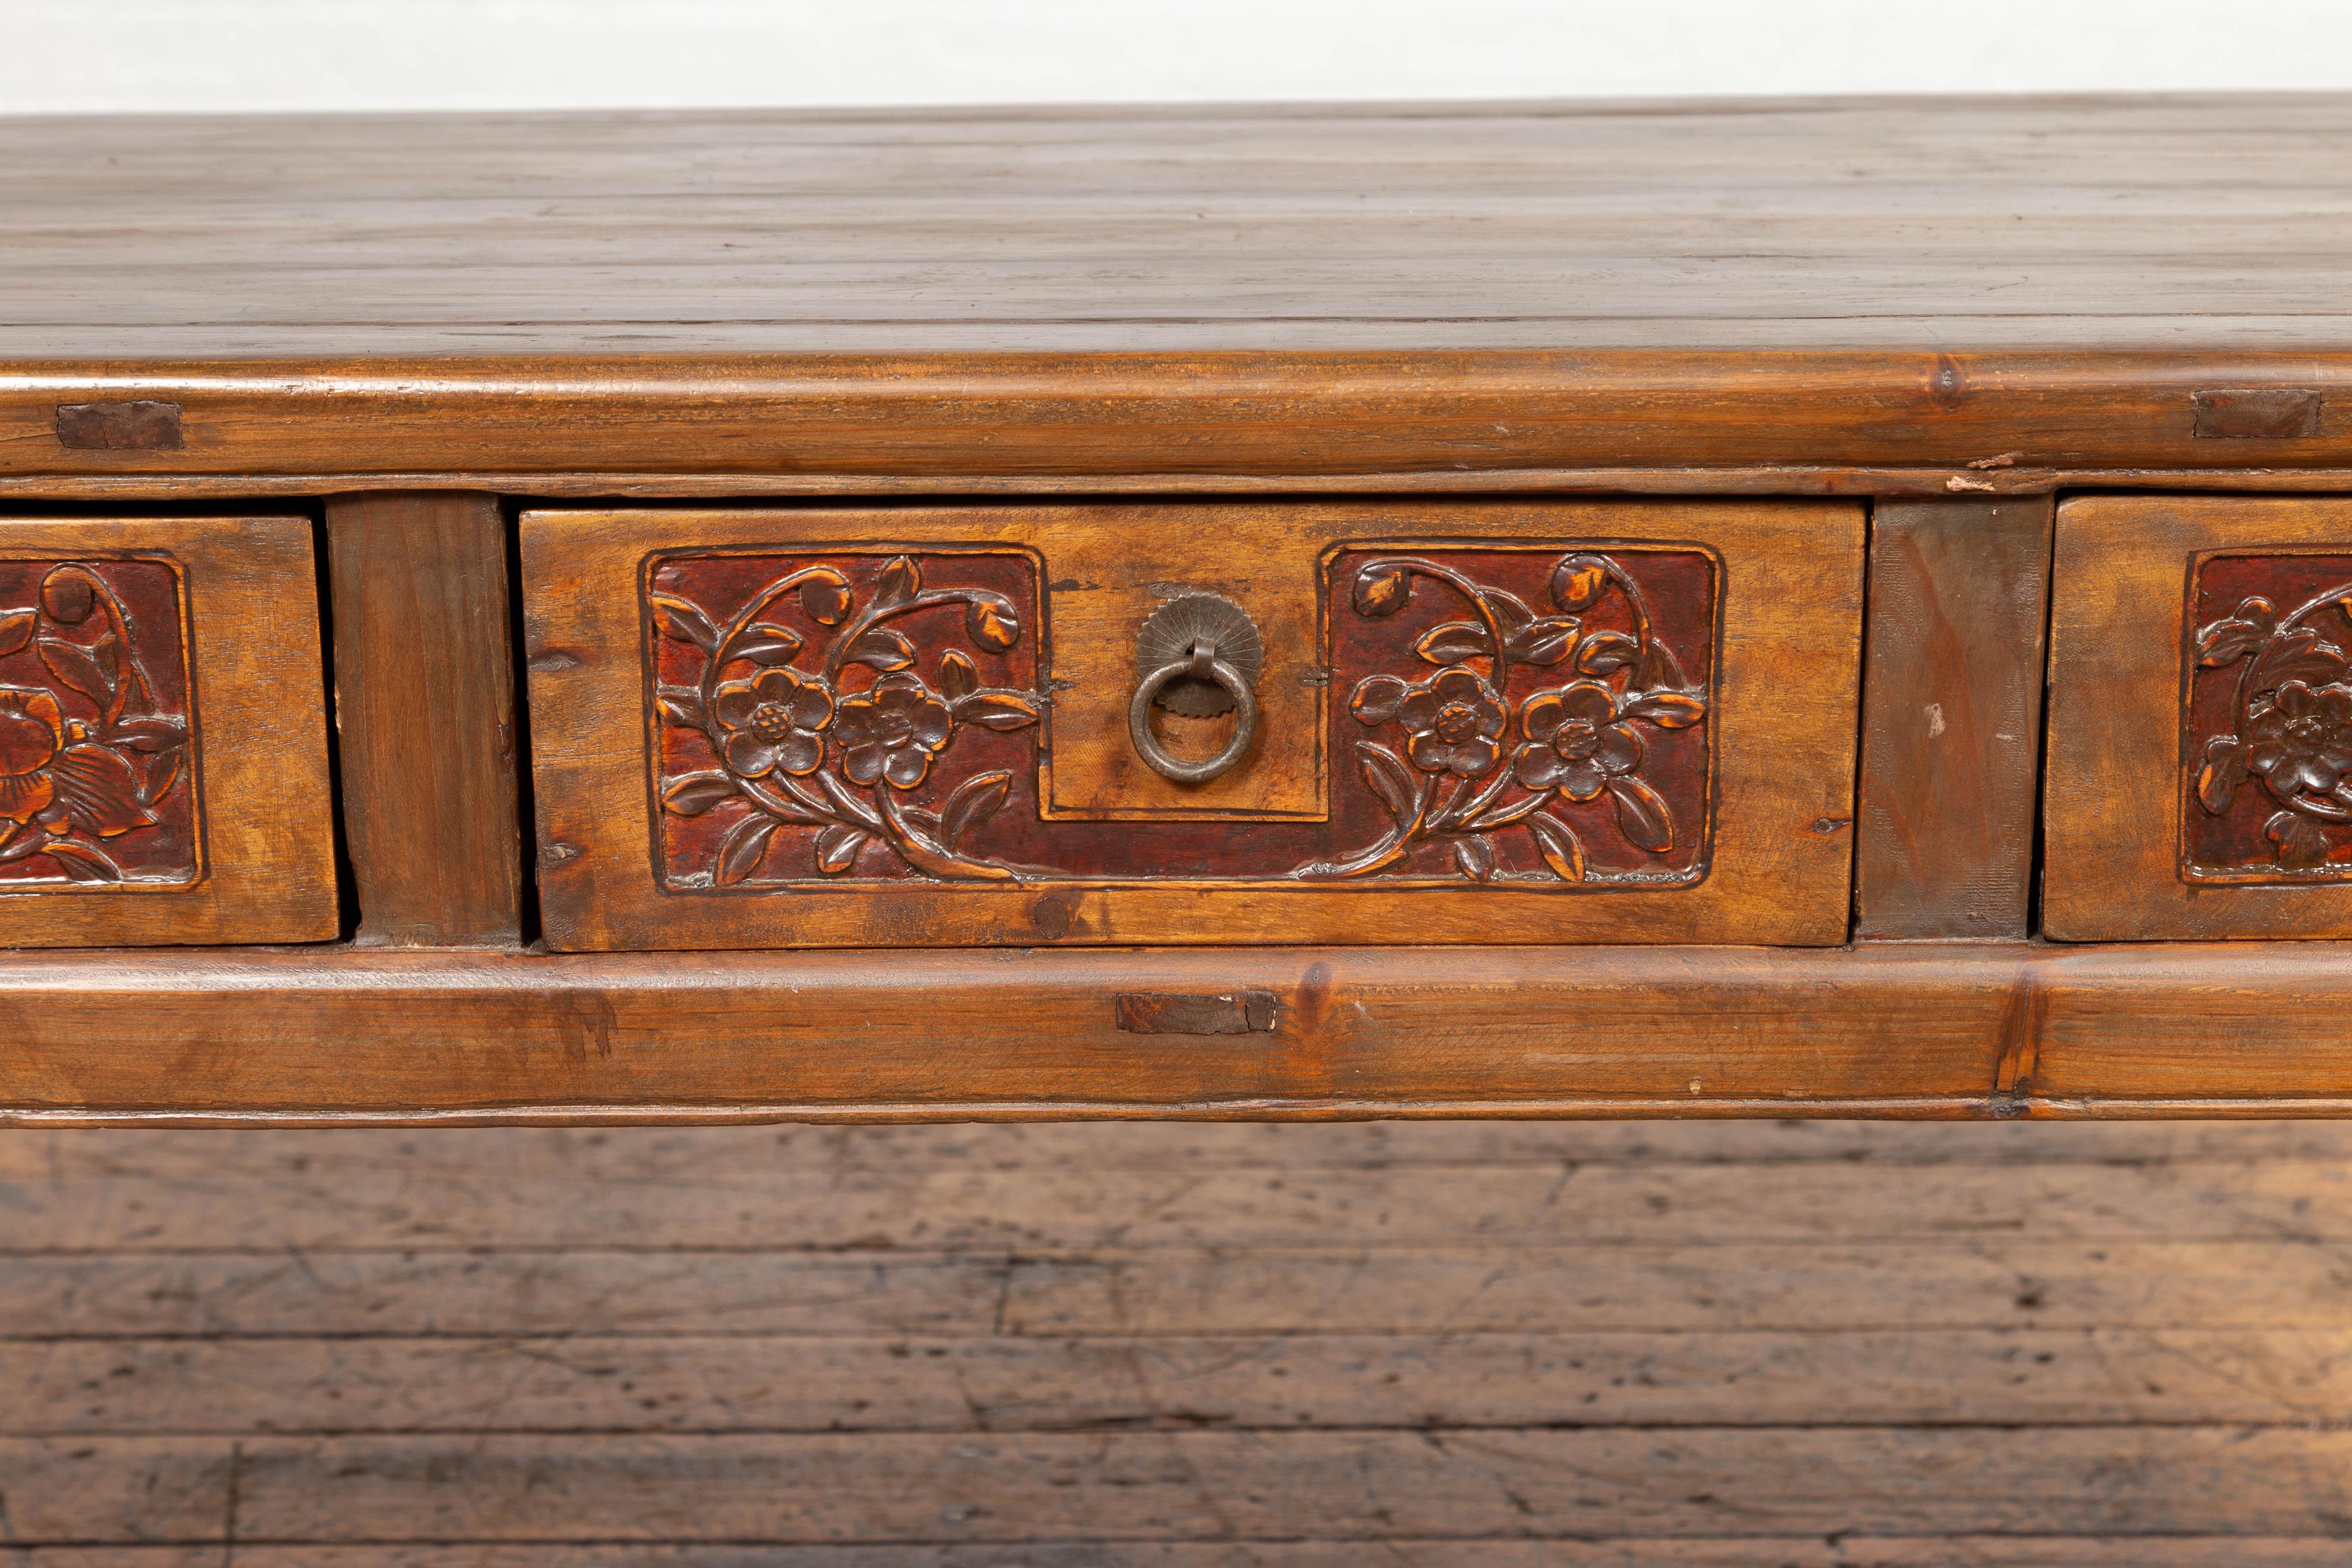 20th Century Chinese Antique Elm Coffee Table with Floral Carved Drawers and Horsehoof Legs